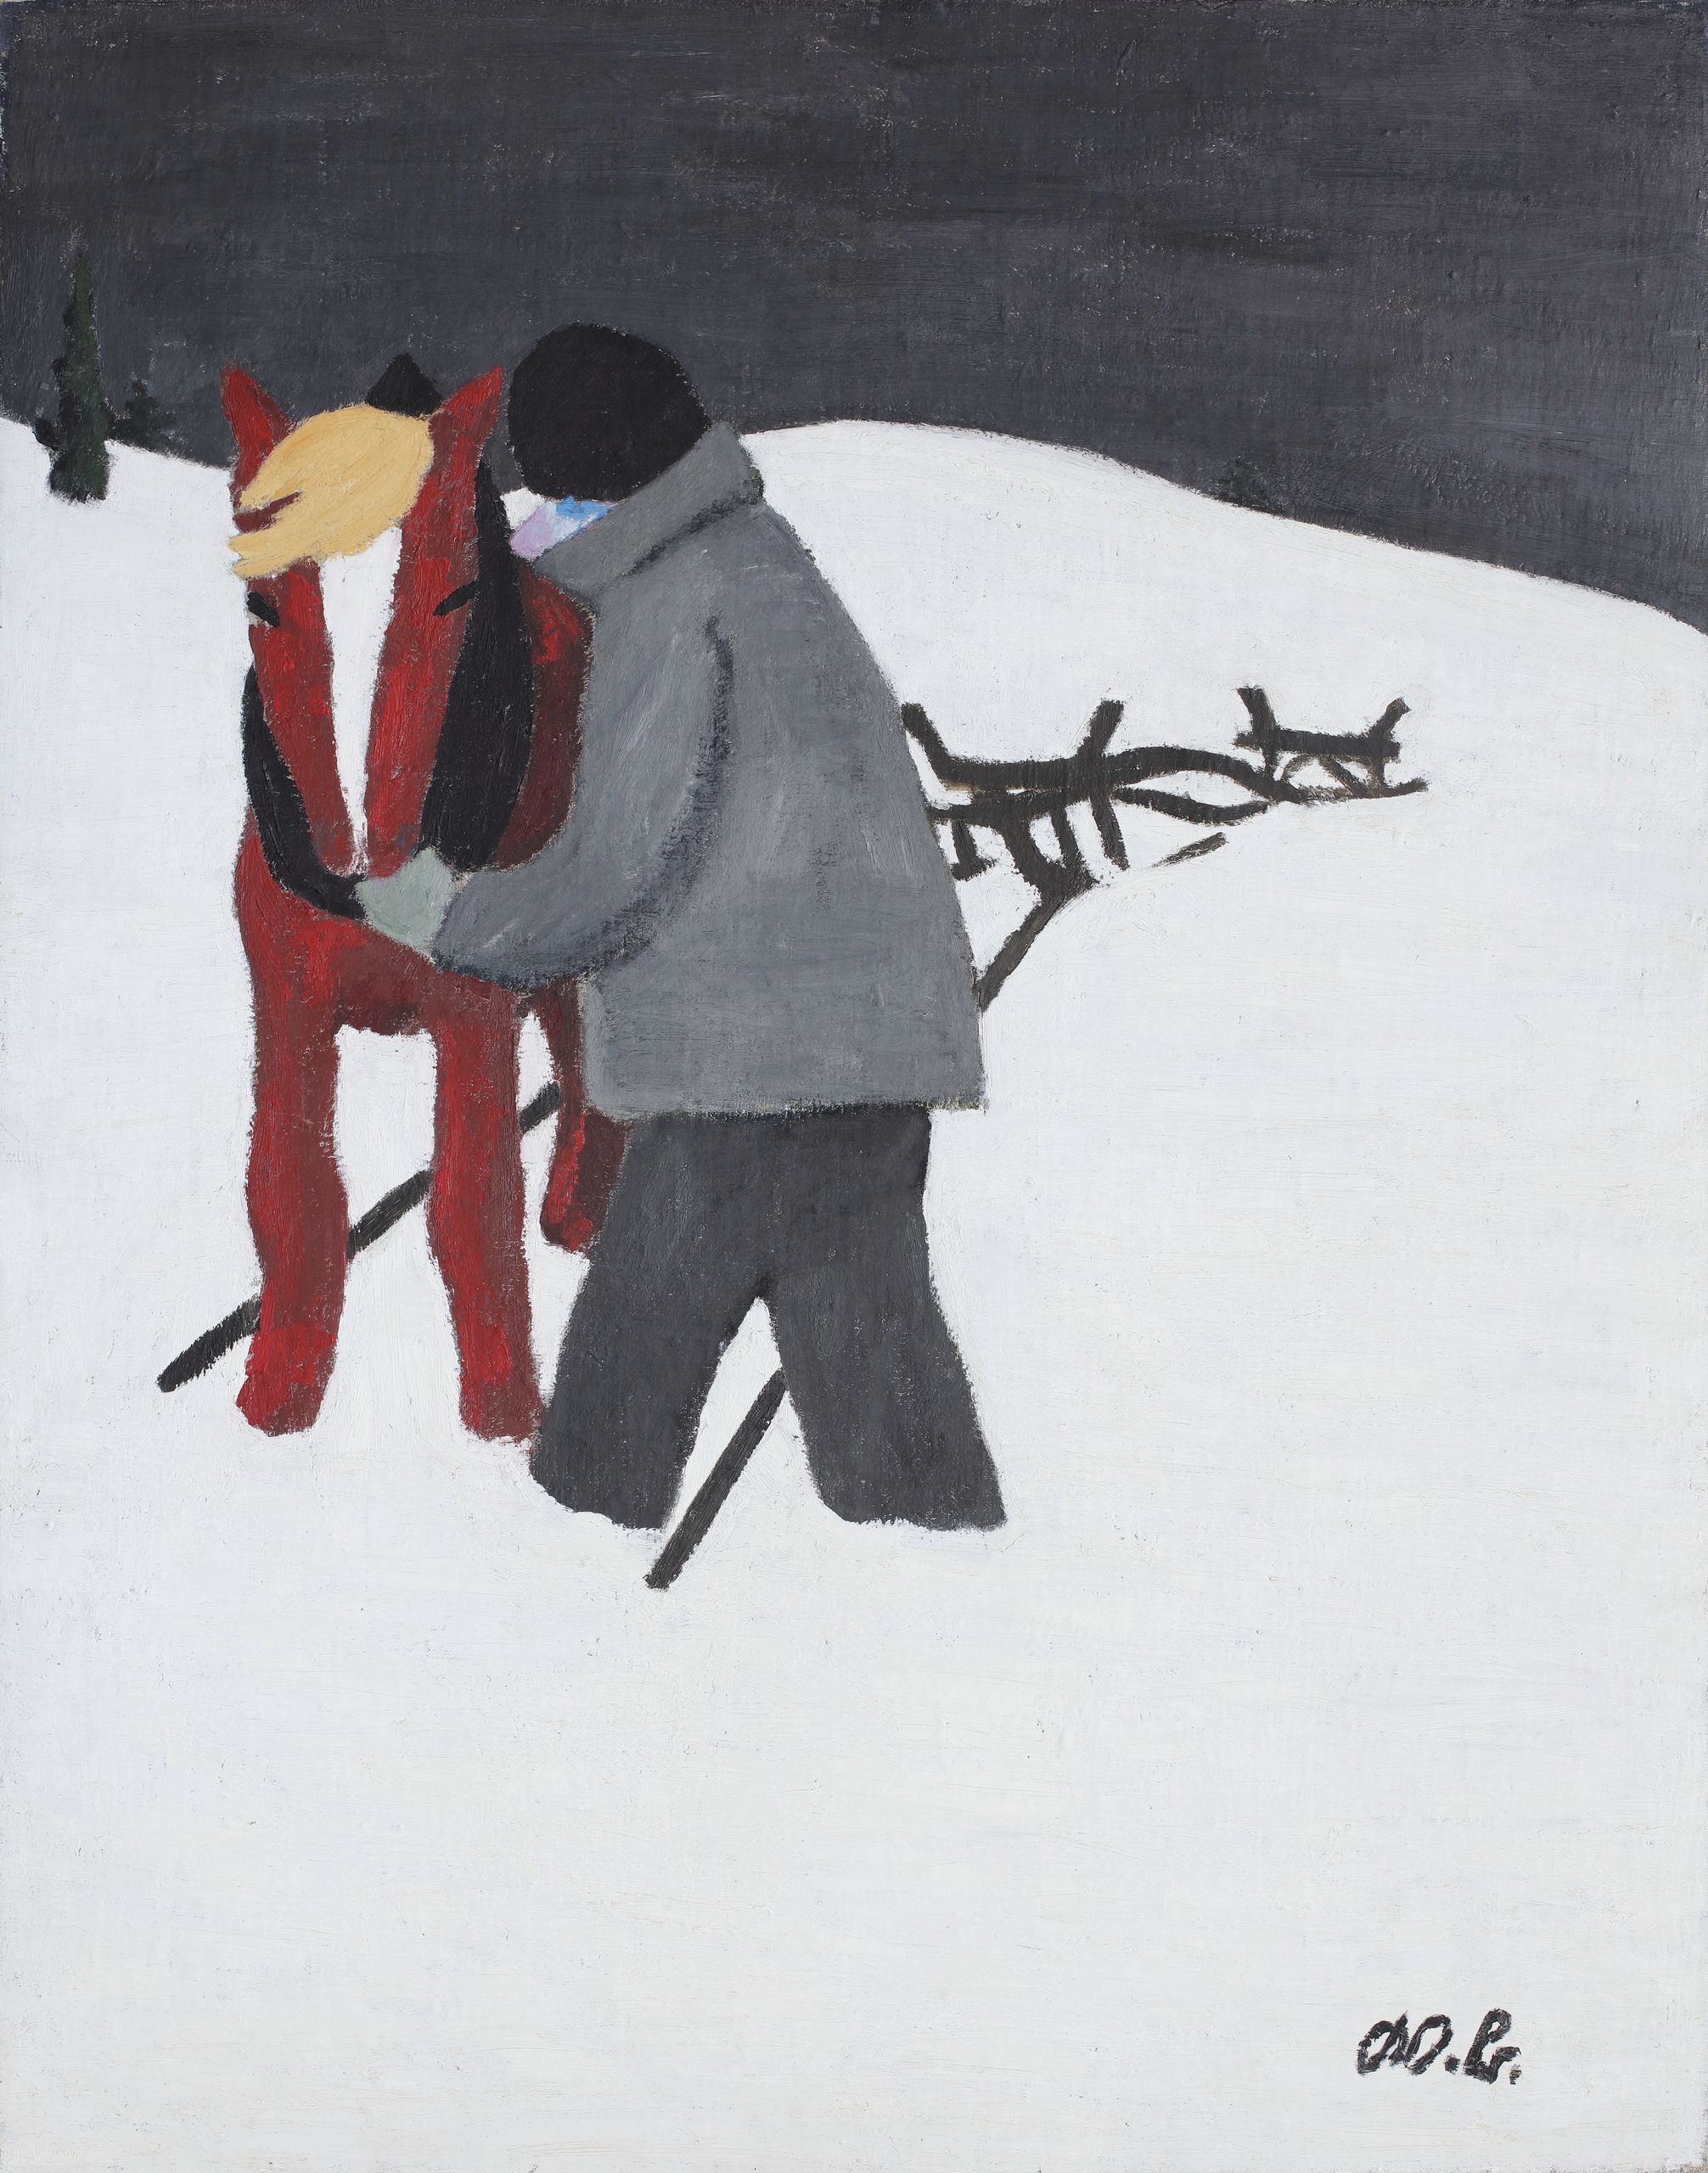 Man with Horse and Sleigh